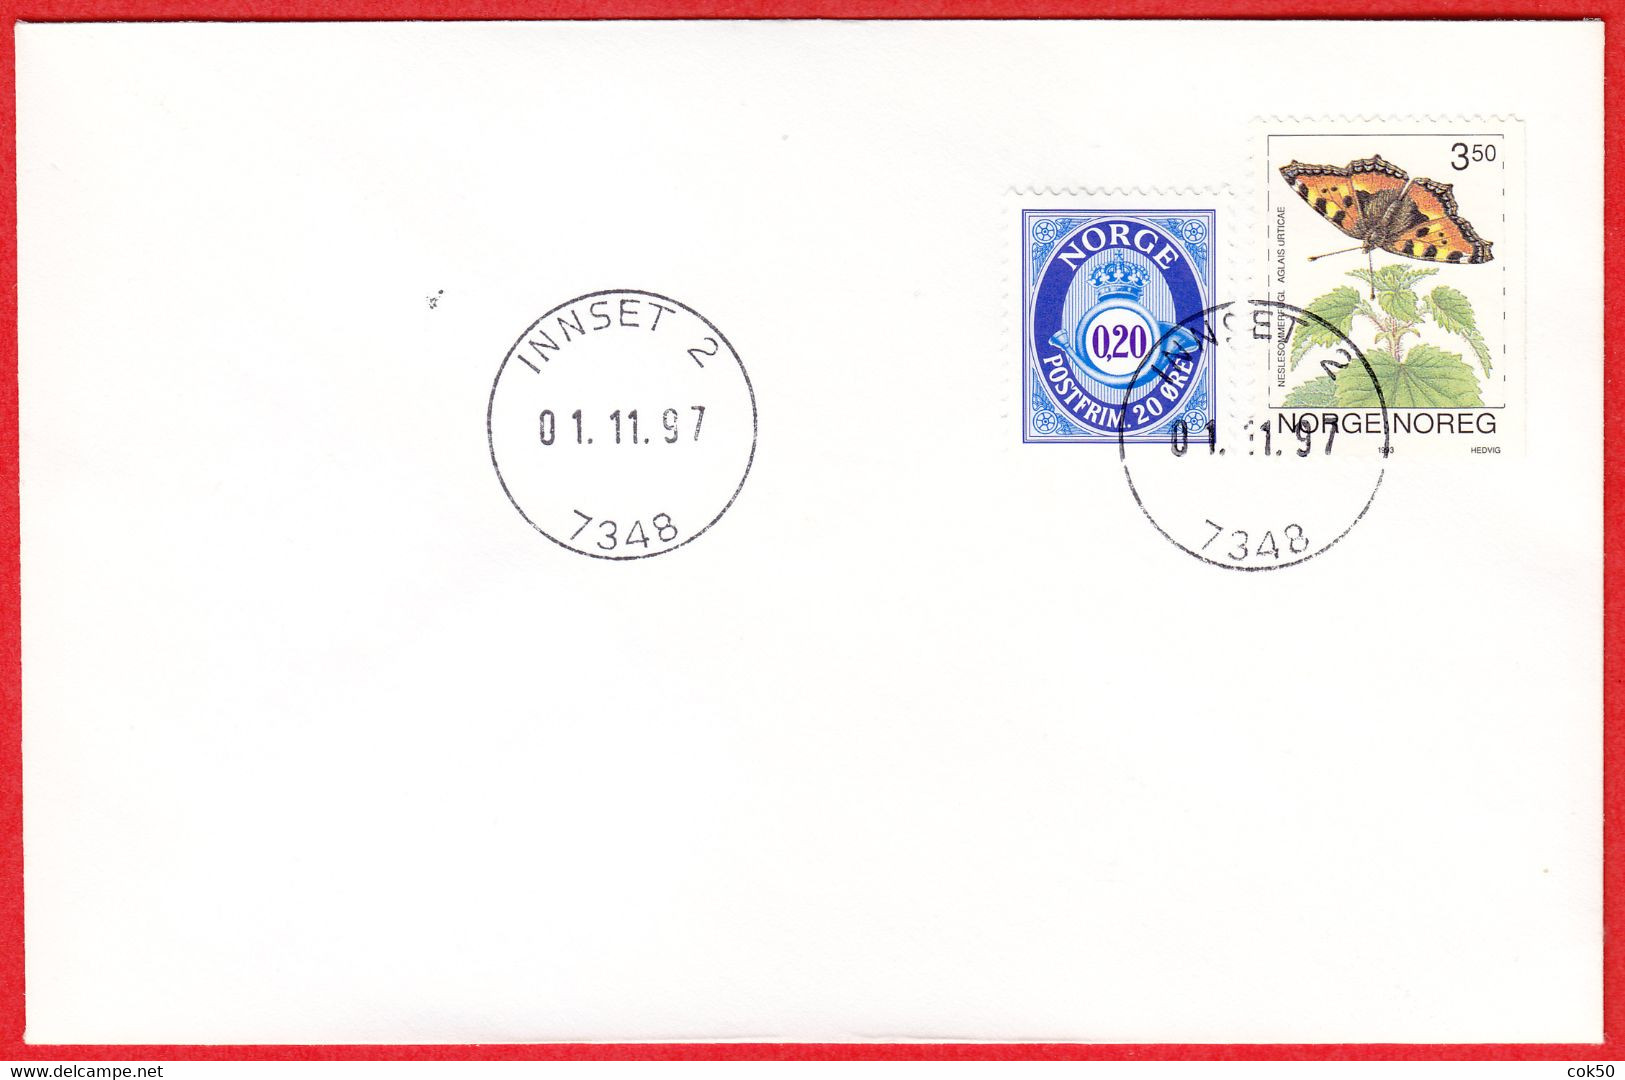 NORWAY -  7348 INNSET 2 (Trøndelag County) - Last Day/postoffice Closed On 1997.11.01 - Local Post Stamps